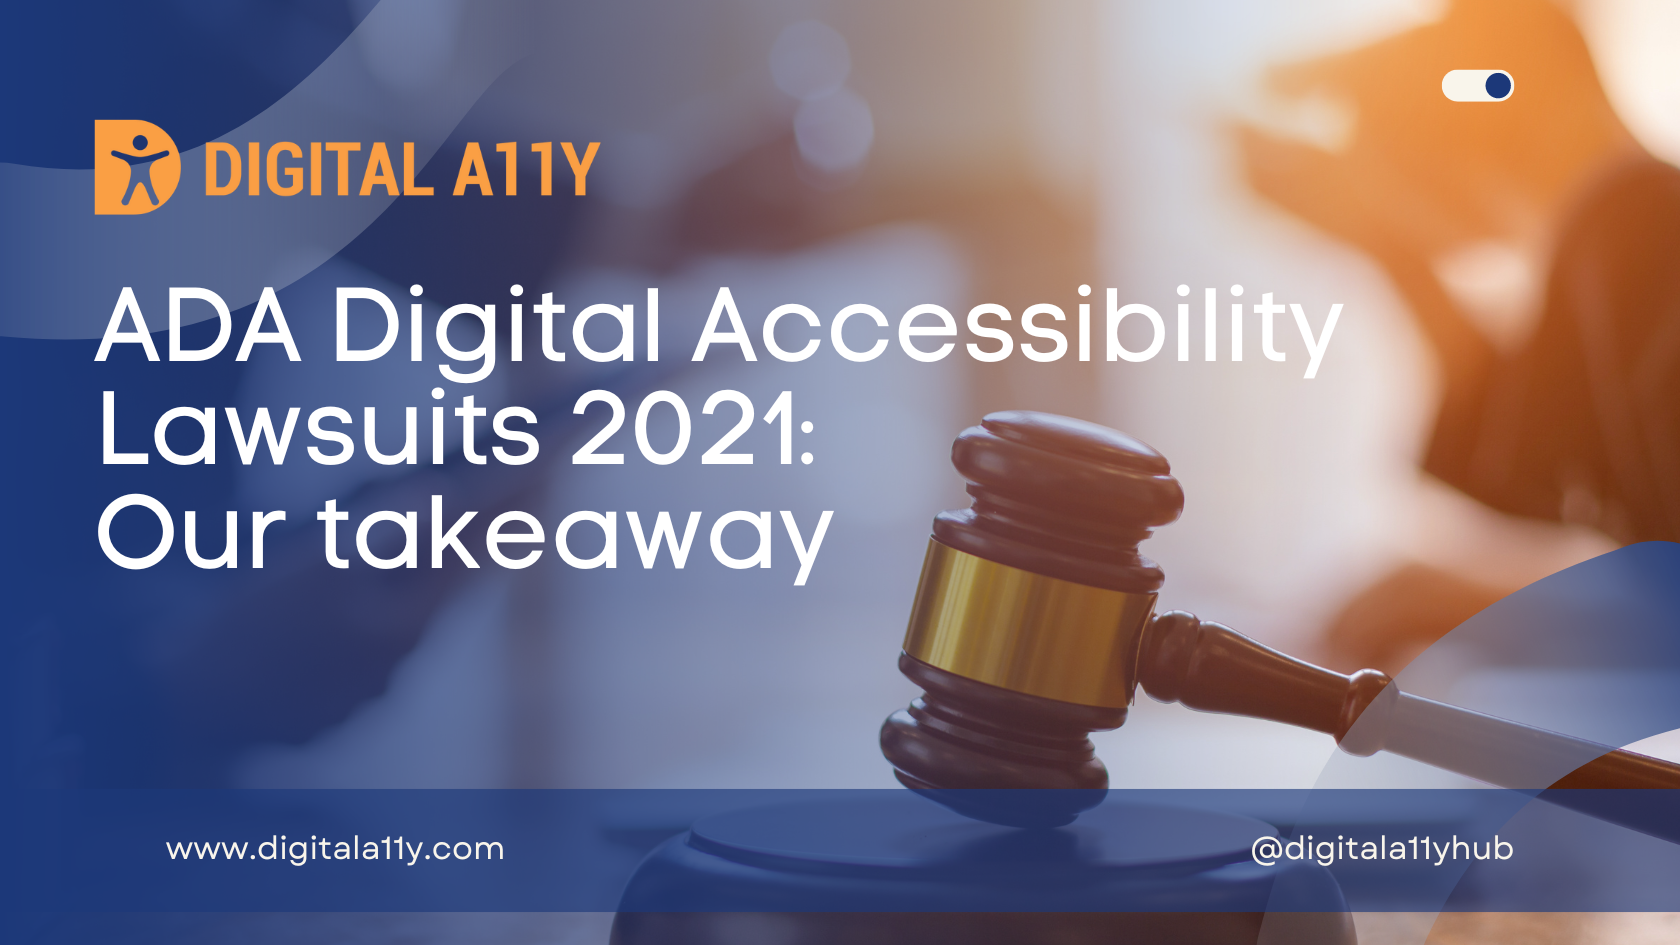 ADA Digital Accessibility Lawsuits 2021: Our takeaway